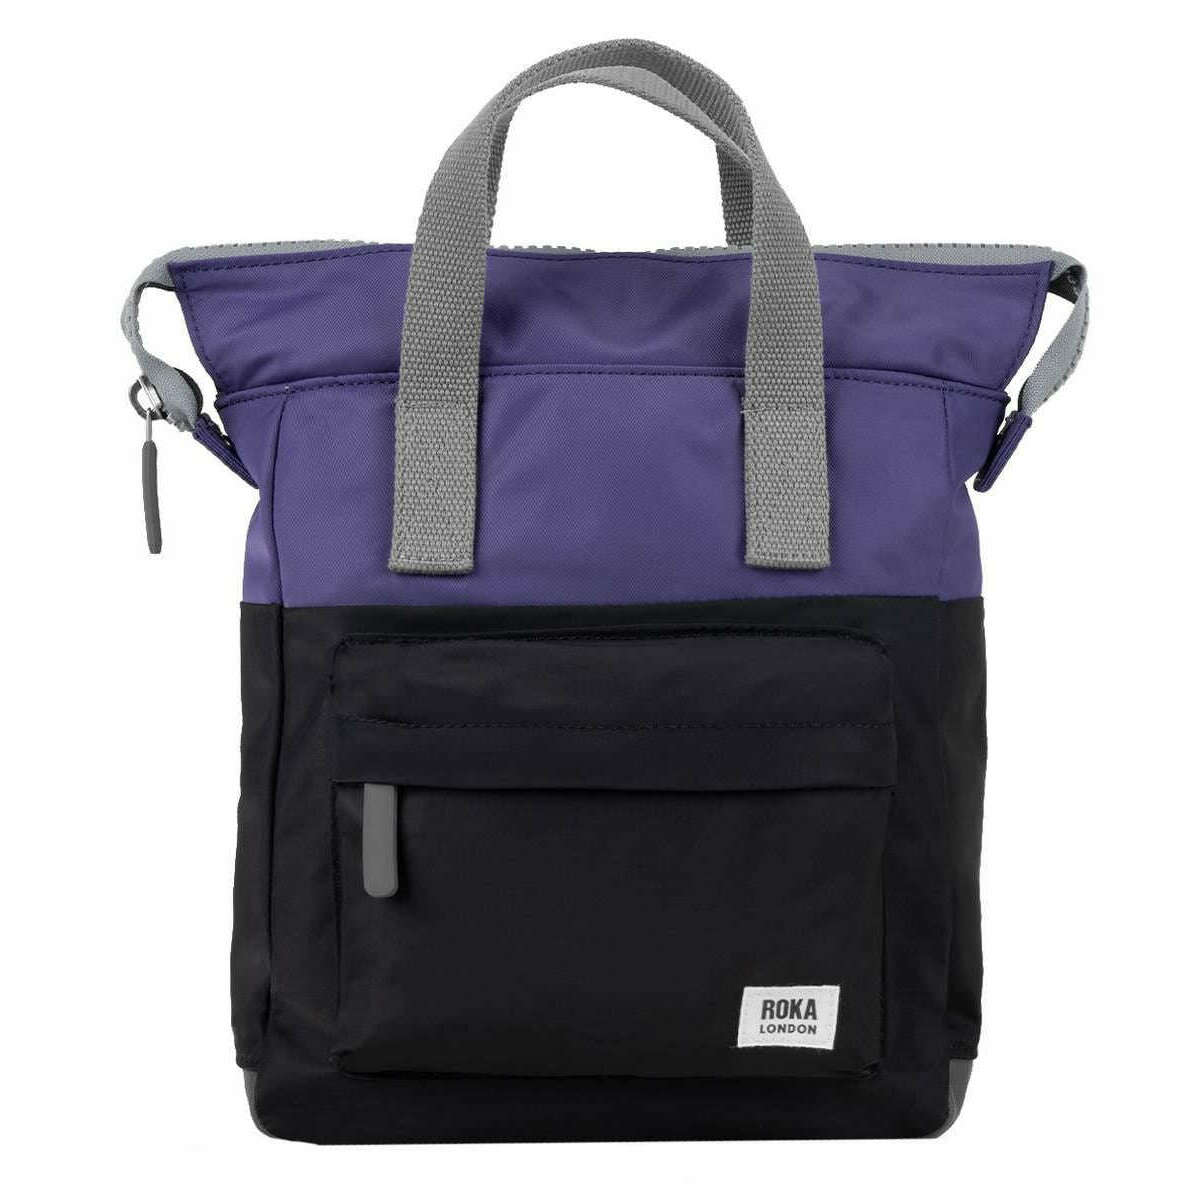 Roka Bantry B Small Creative Waste Two Tone Recycled Nylon Backpack - Black/Mulberry Purple